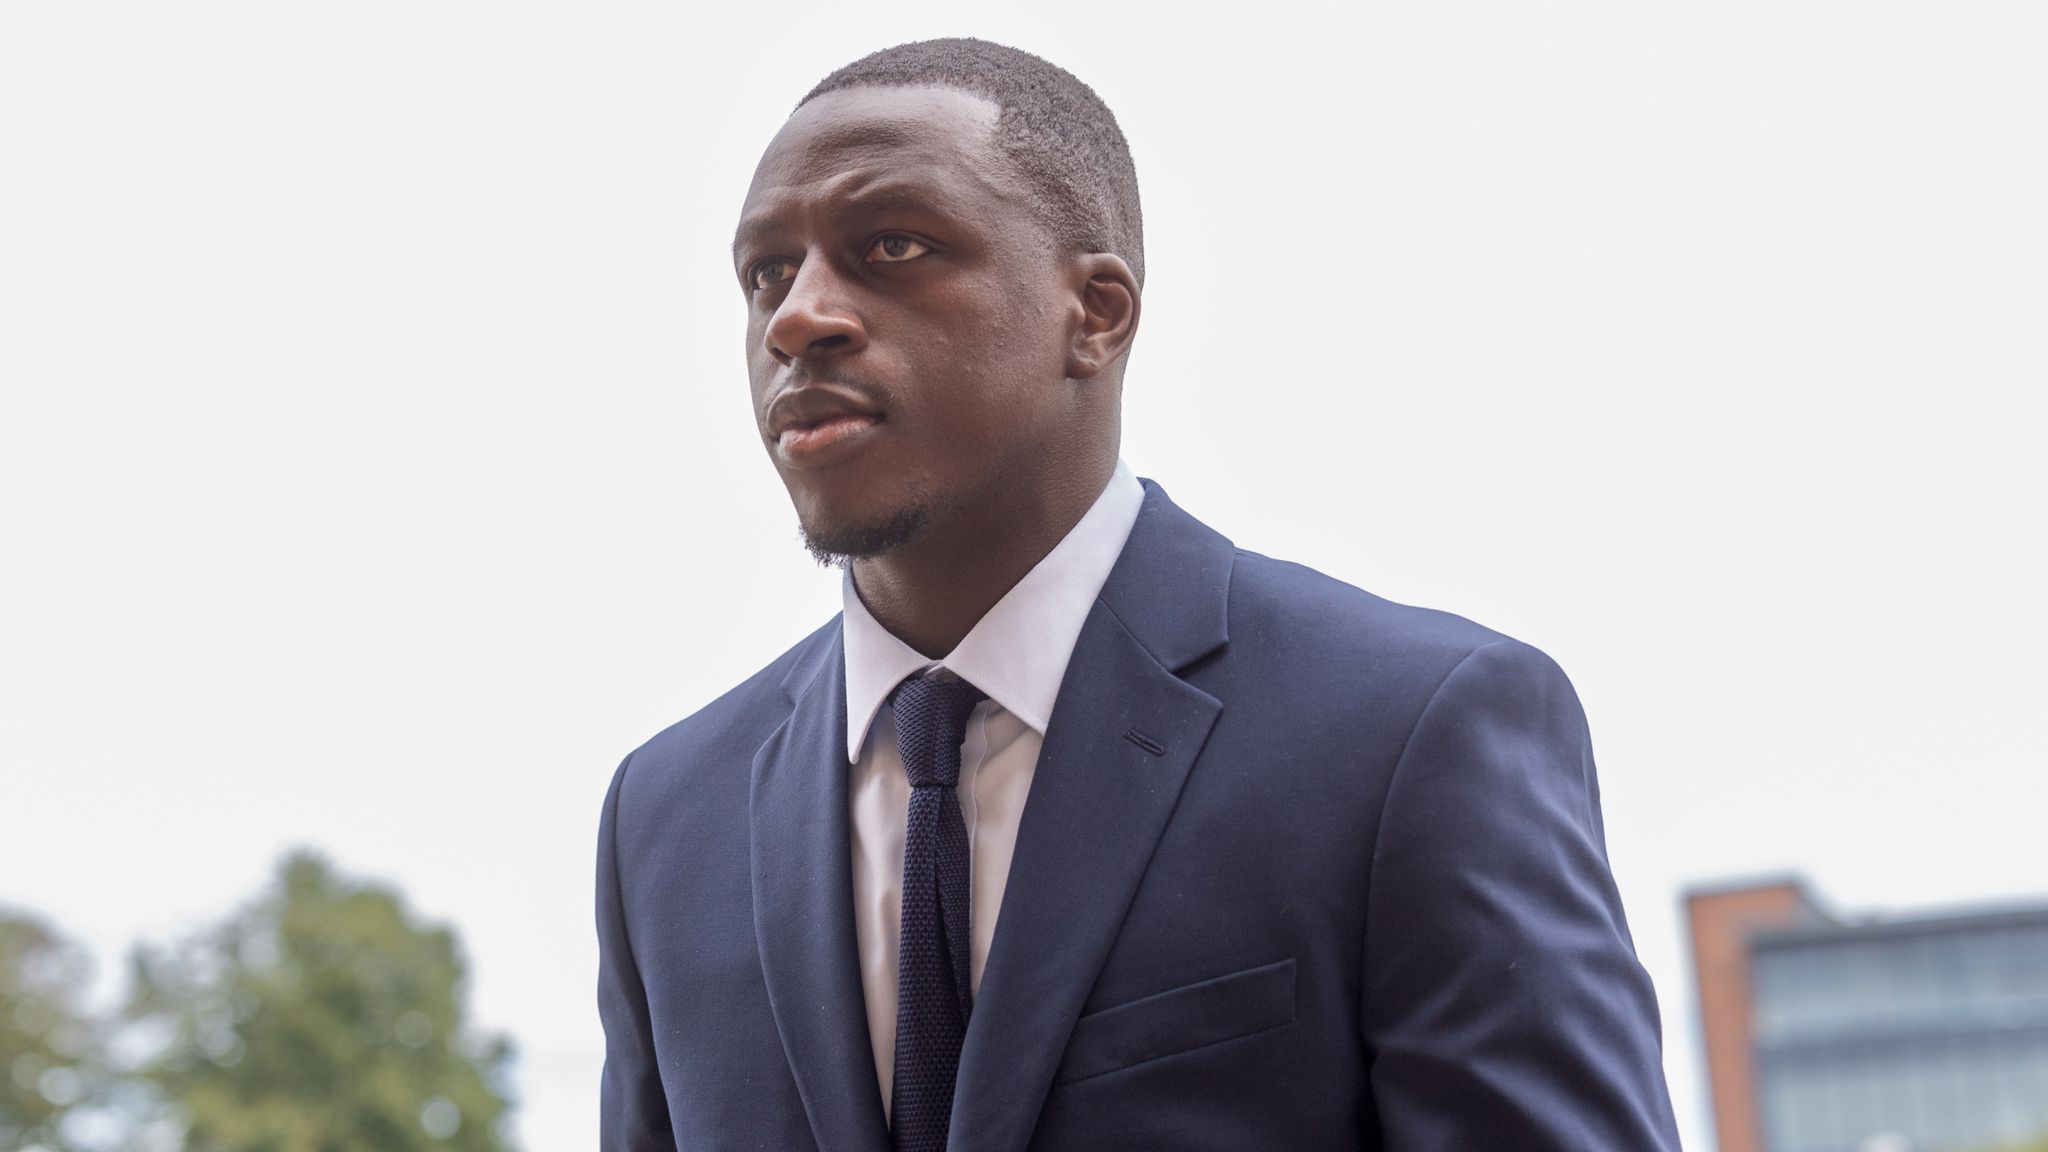 French Footballer Benjamin Mendy Sues Former Club Manchester City for Unpaid Wages